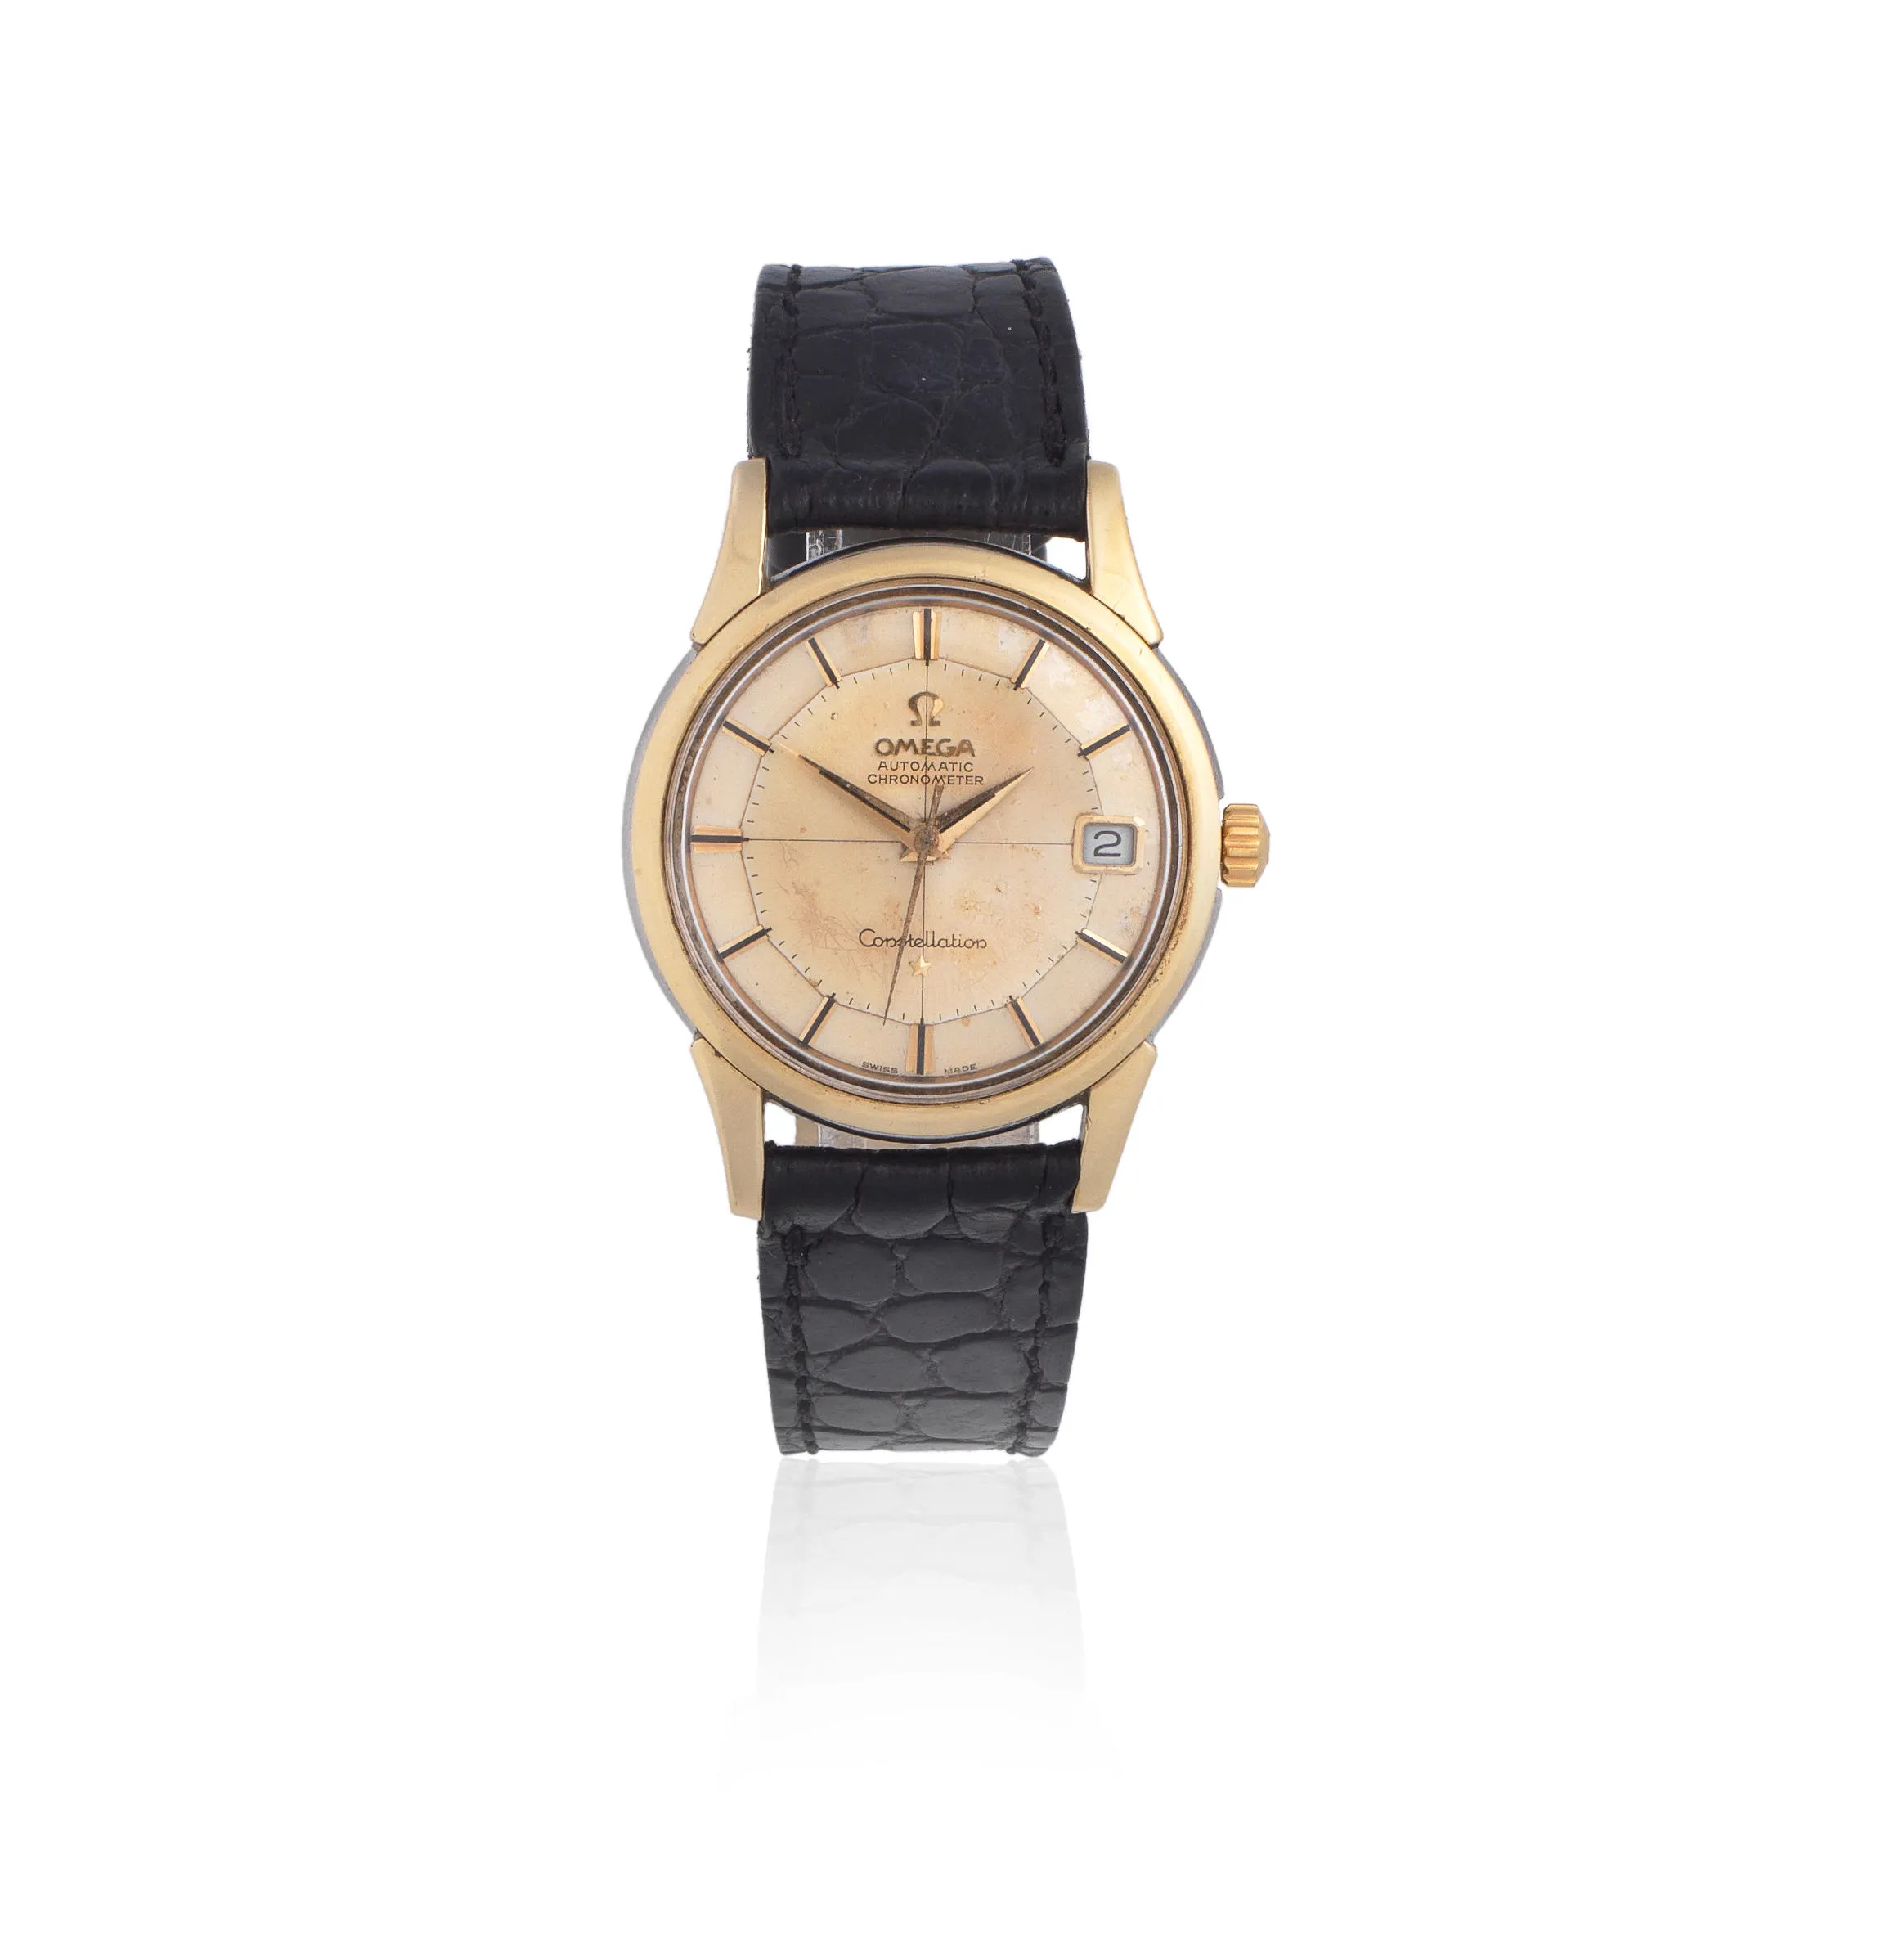 Omega Constellation 14393 61 SC 34mm Stainless steel and gold-plated Silver